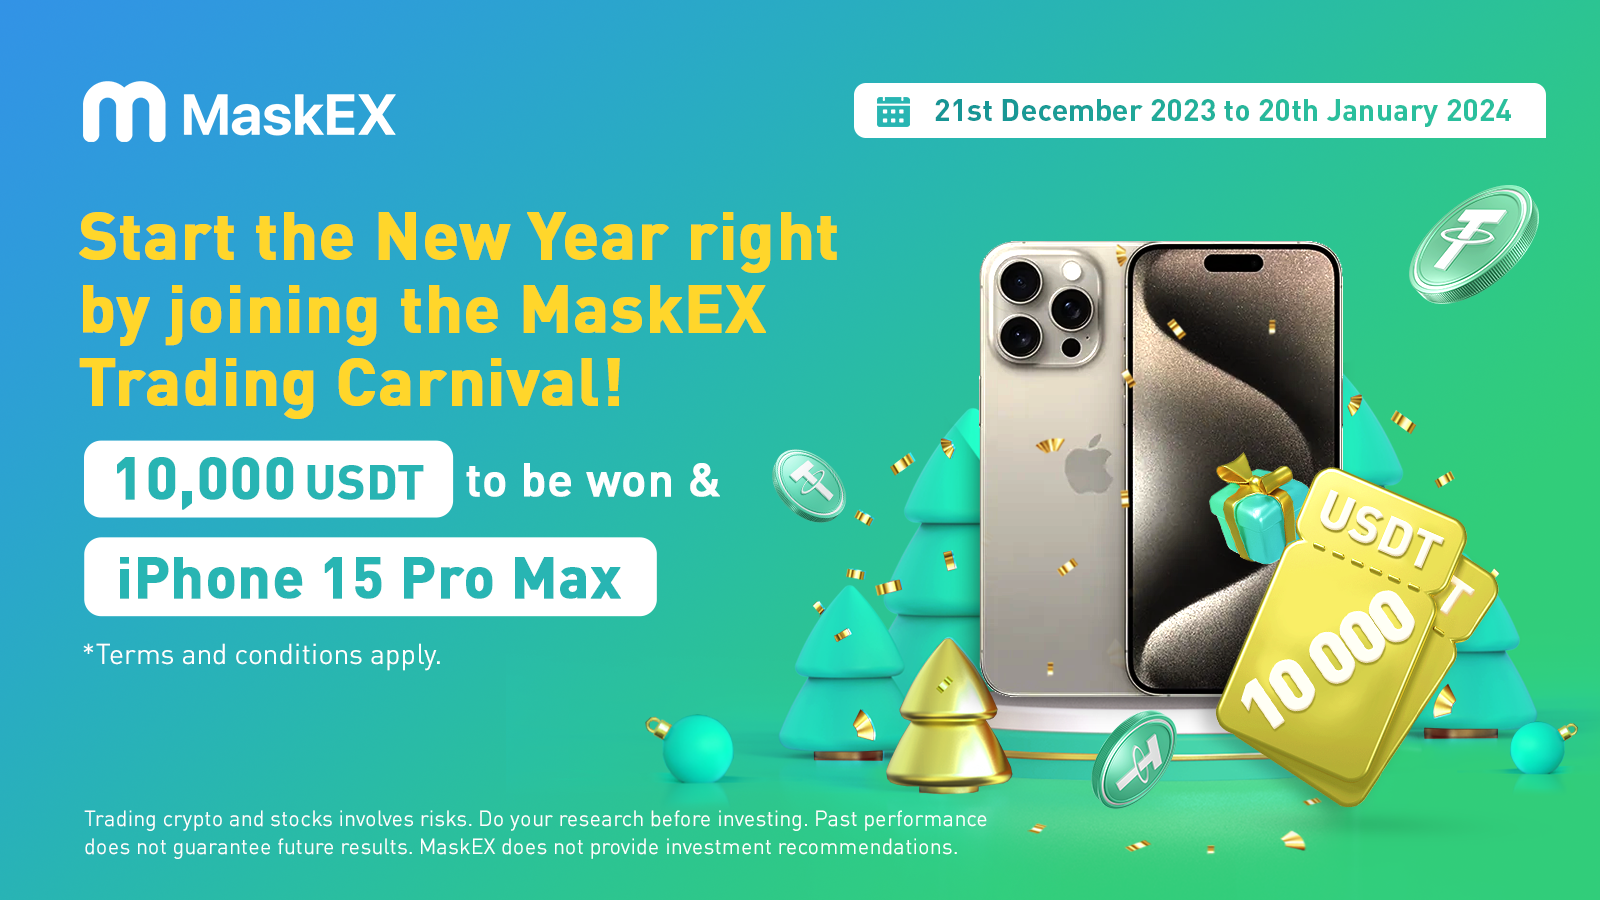 New Year Trading Carnival: 10,000 USDT to be won and iPhone 15 Pro Max!